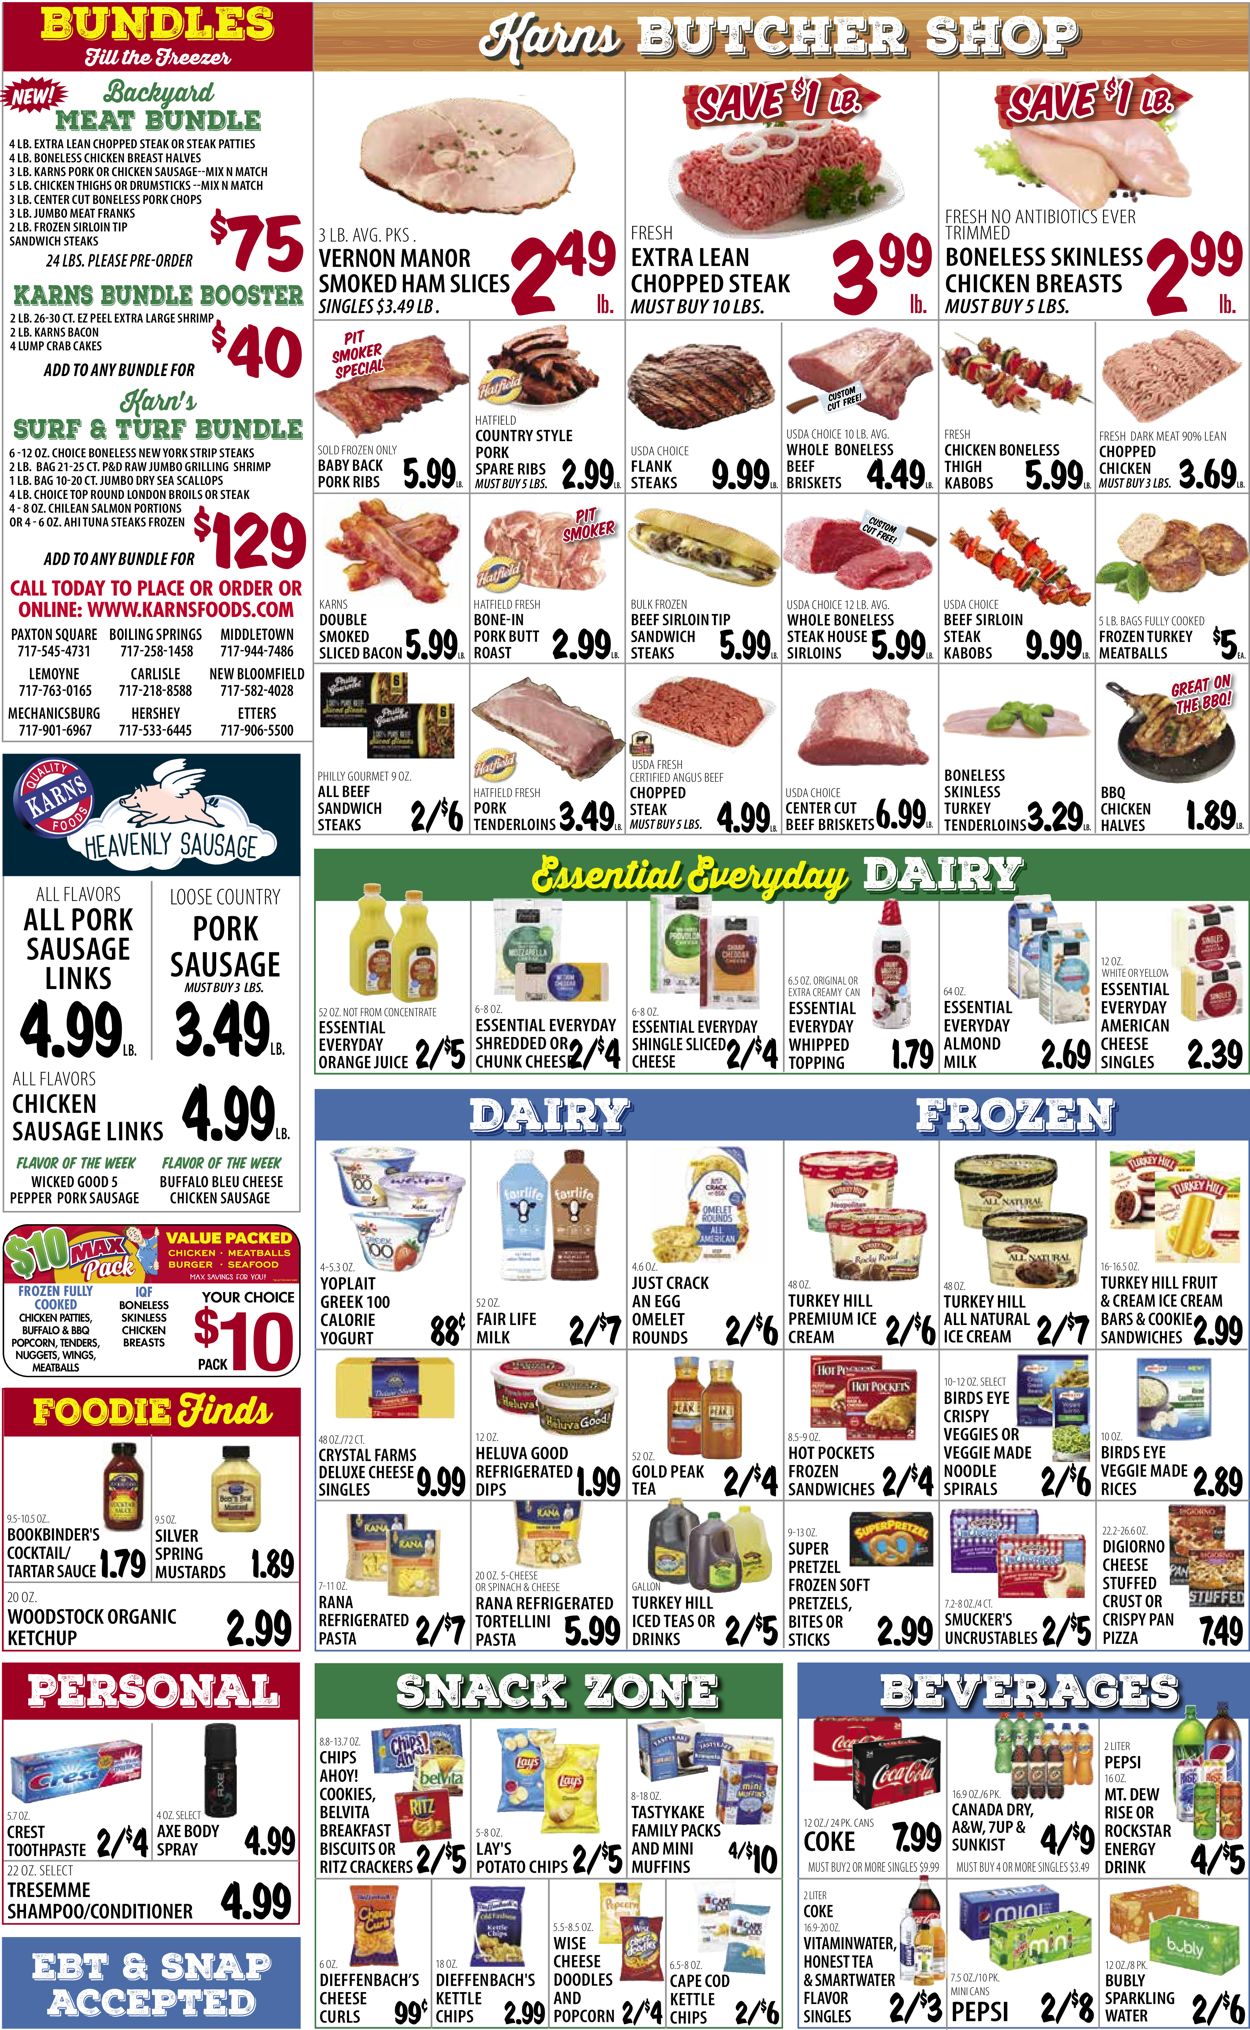 Karns Quality Foods Ad from 07/20/2021